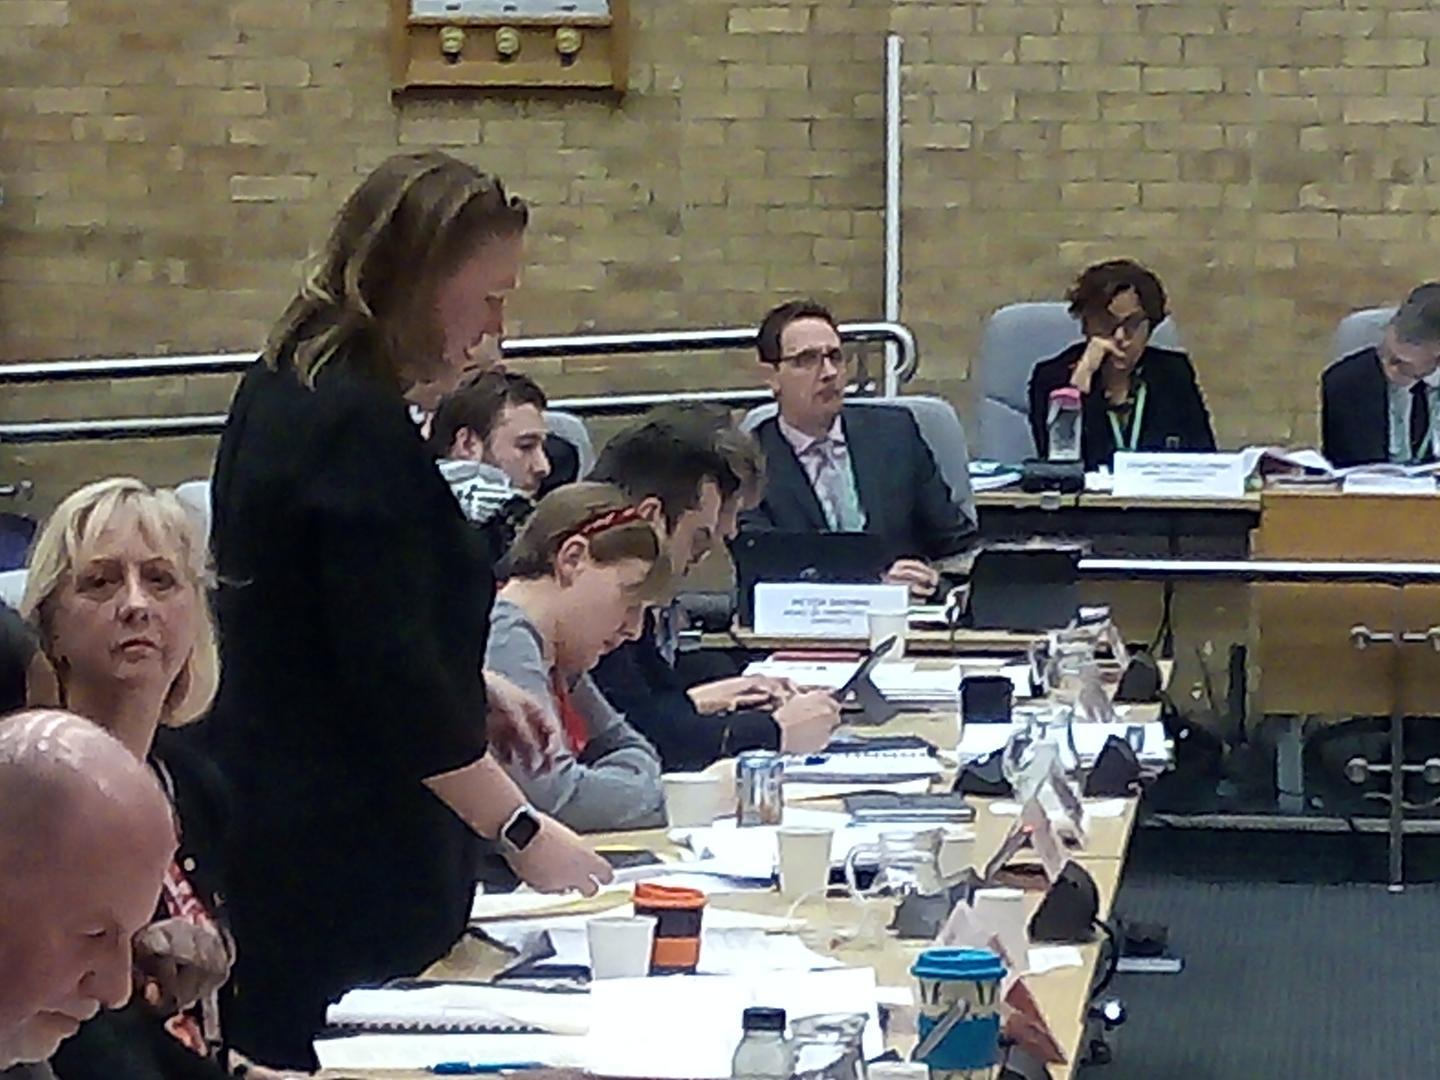 Cllr Emily Darlington (Lab, Bletchley East), commended the 250,000 being put into the budget to implement a sustainability action plan. The council is also developing a biodiversity strategy to help the citys wildlife.